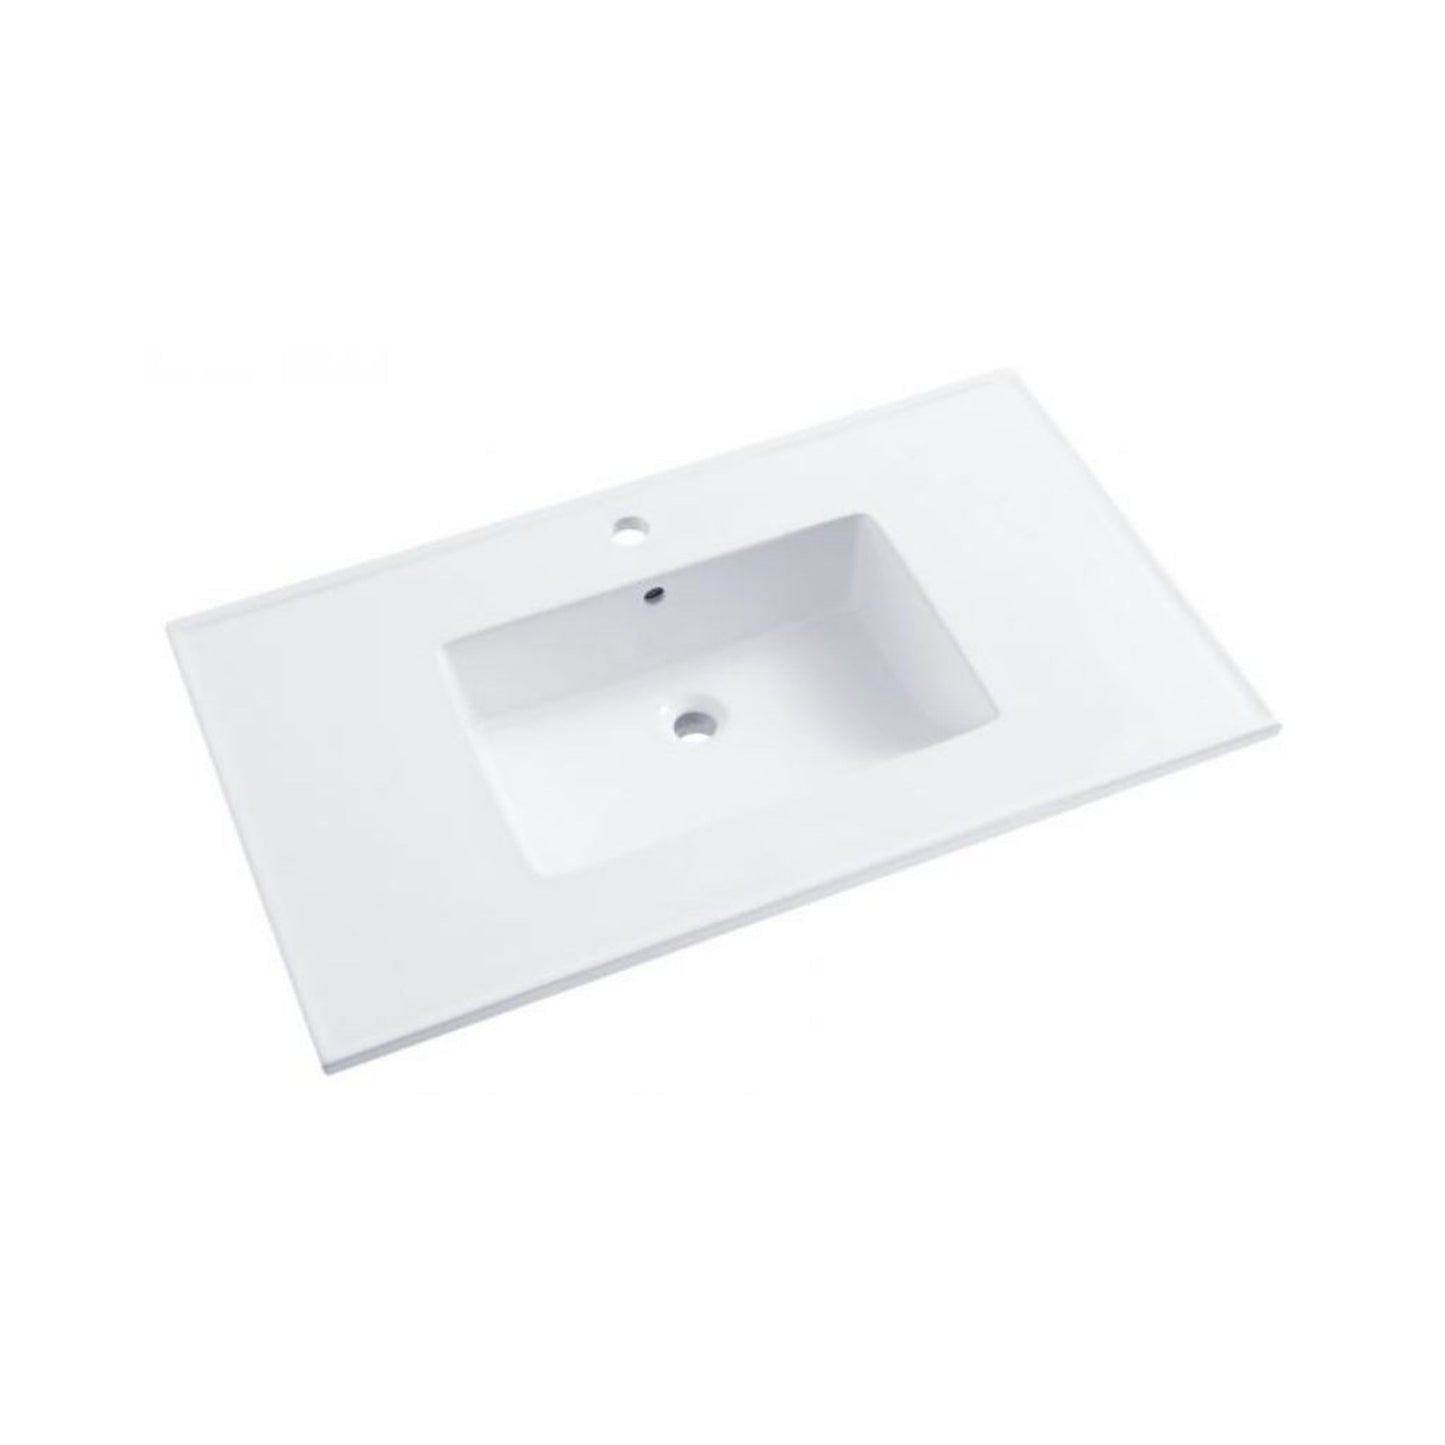 Ratel 37" x 22" White Ceramic Single Integrated Sink and Vanity Top